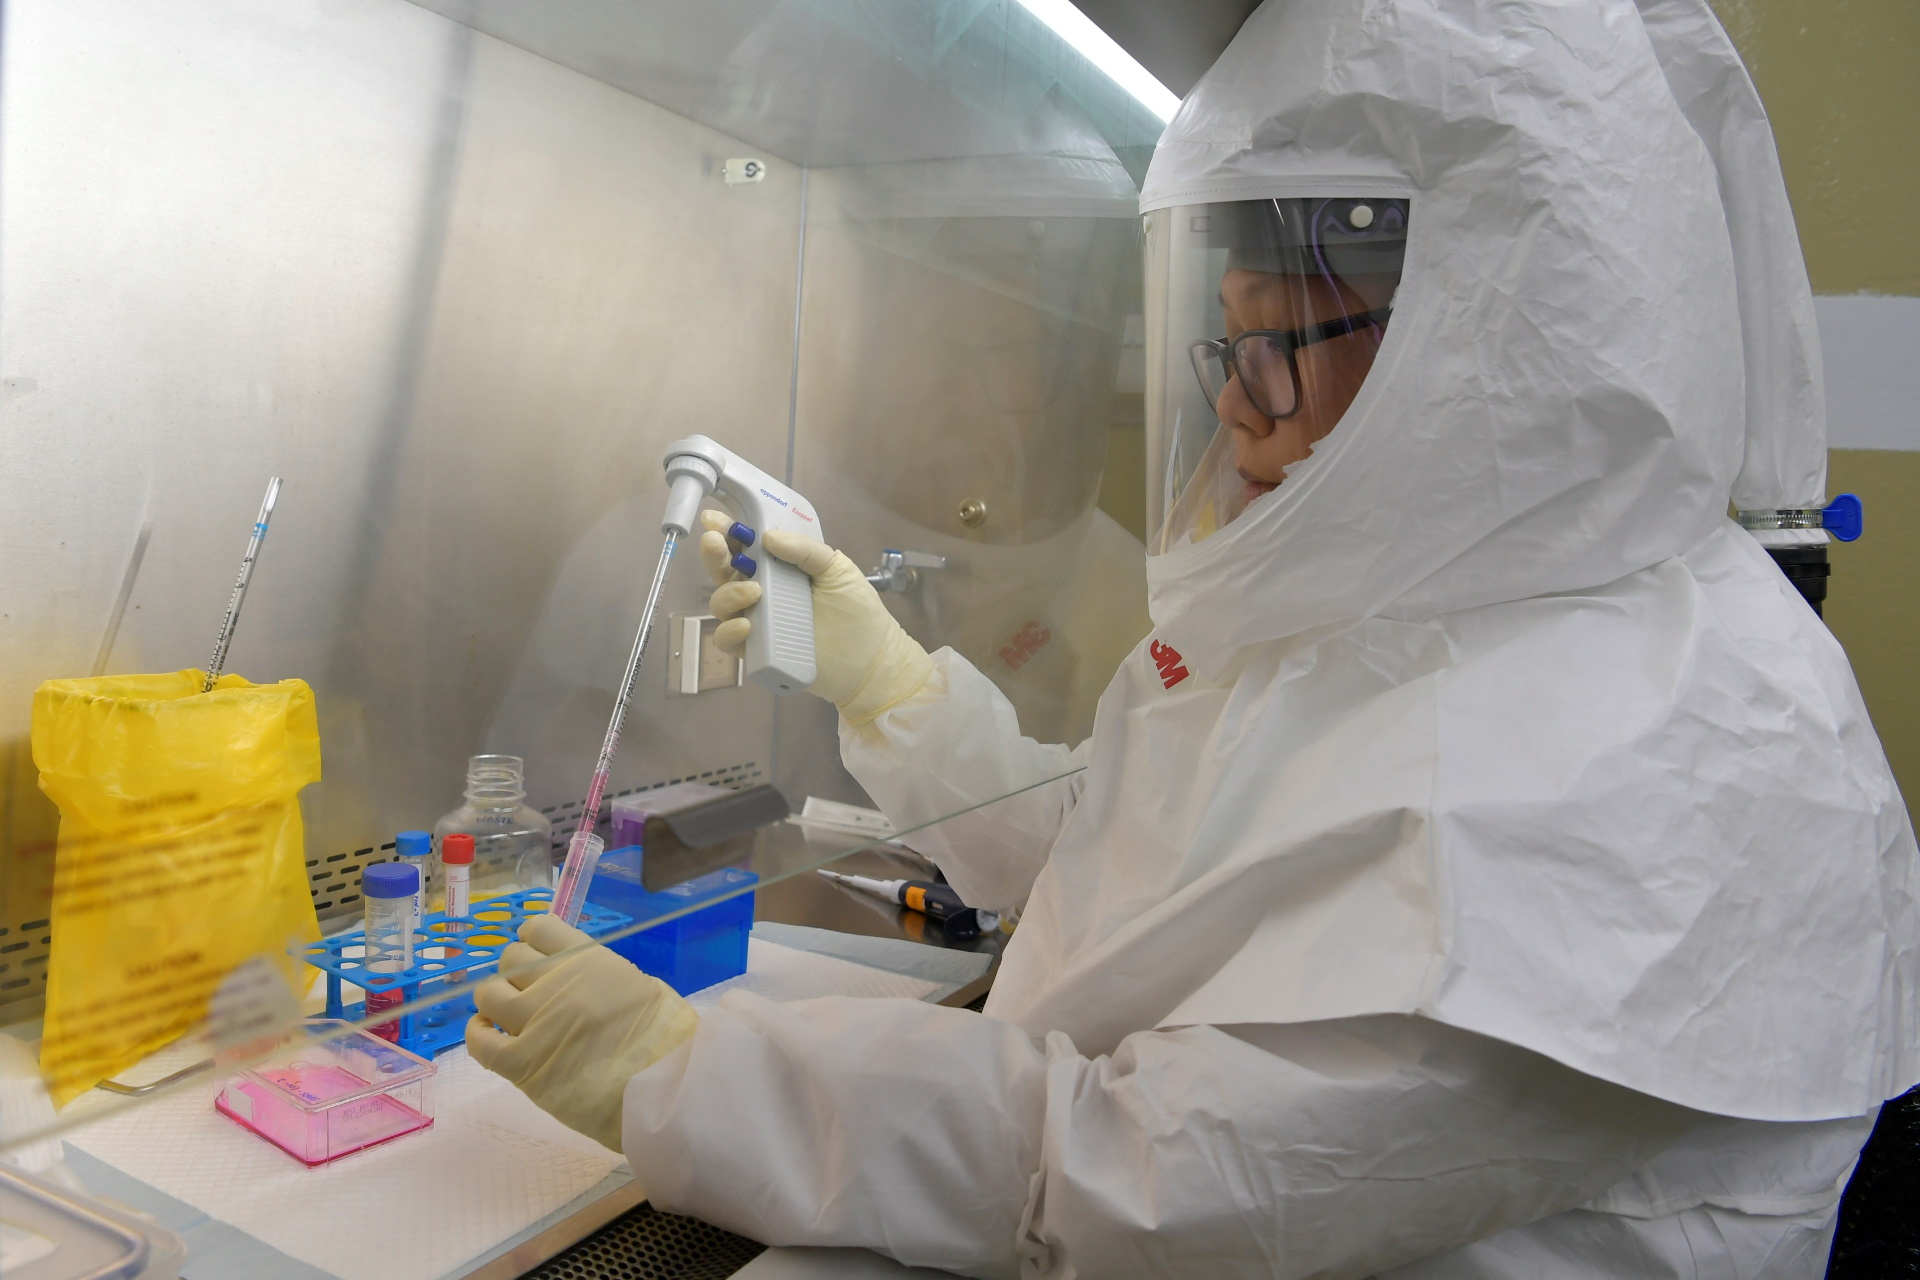 DSO to upgrade lab to highest biosafety level as MINDEF & SAF gear up for future biothreats